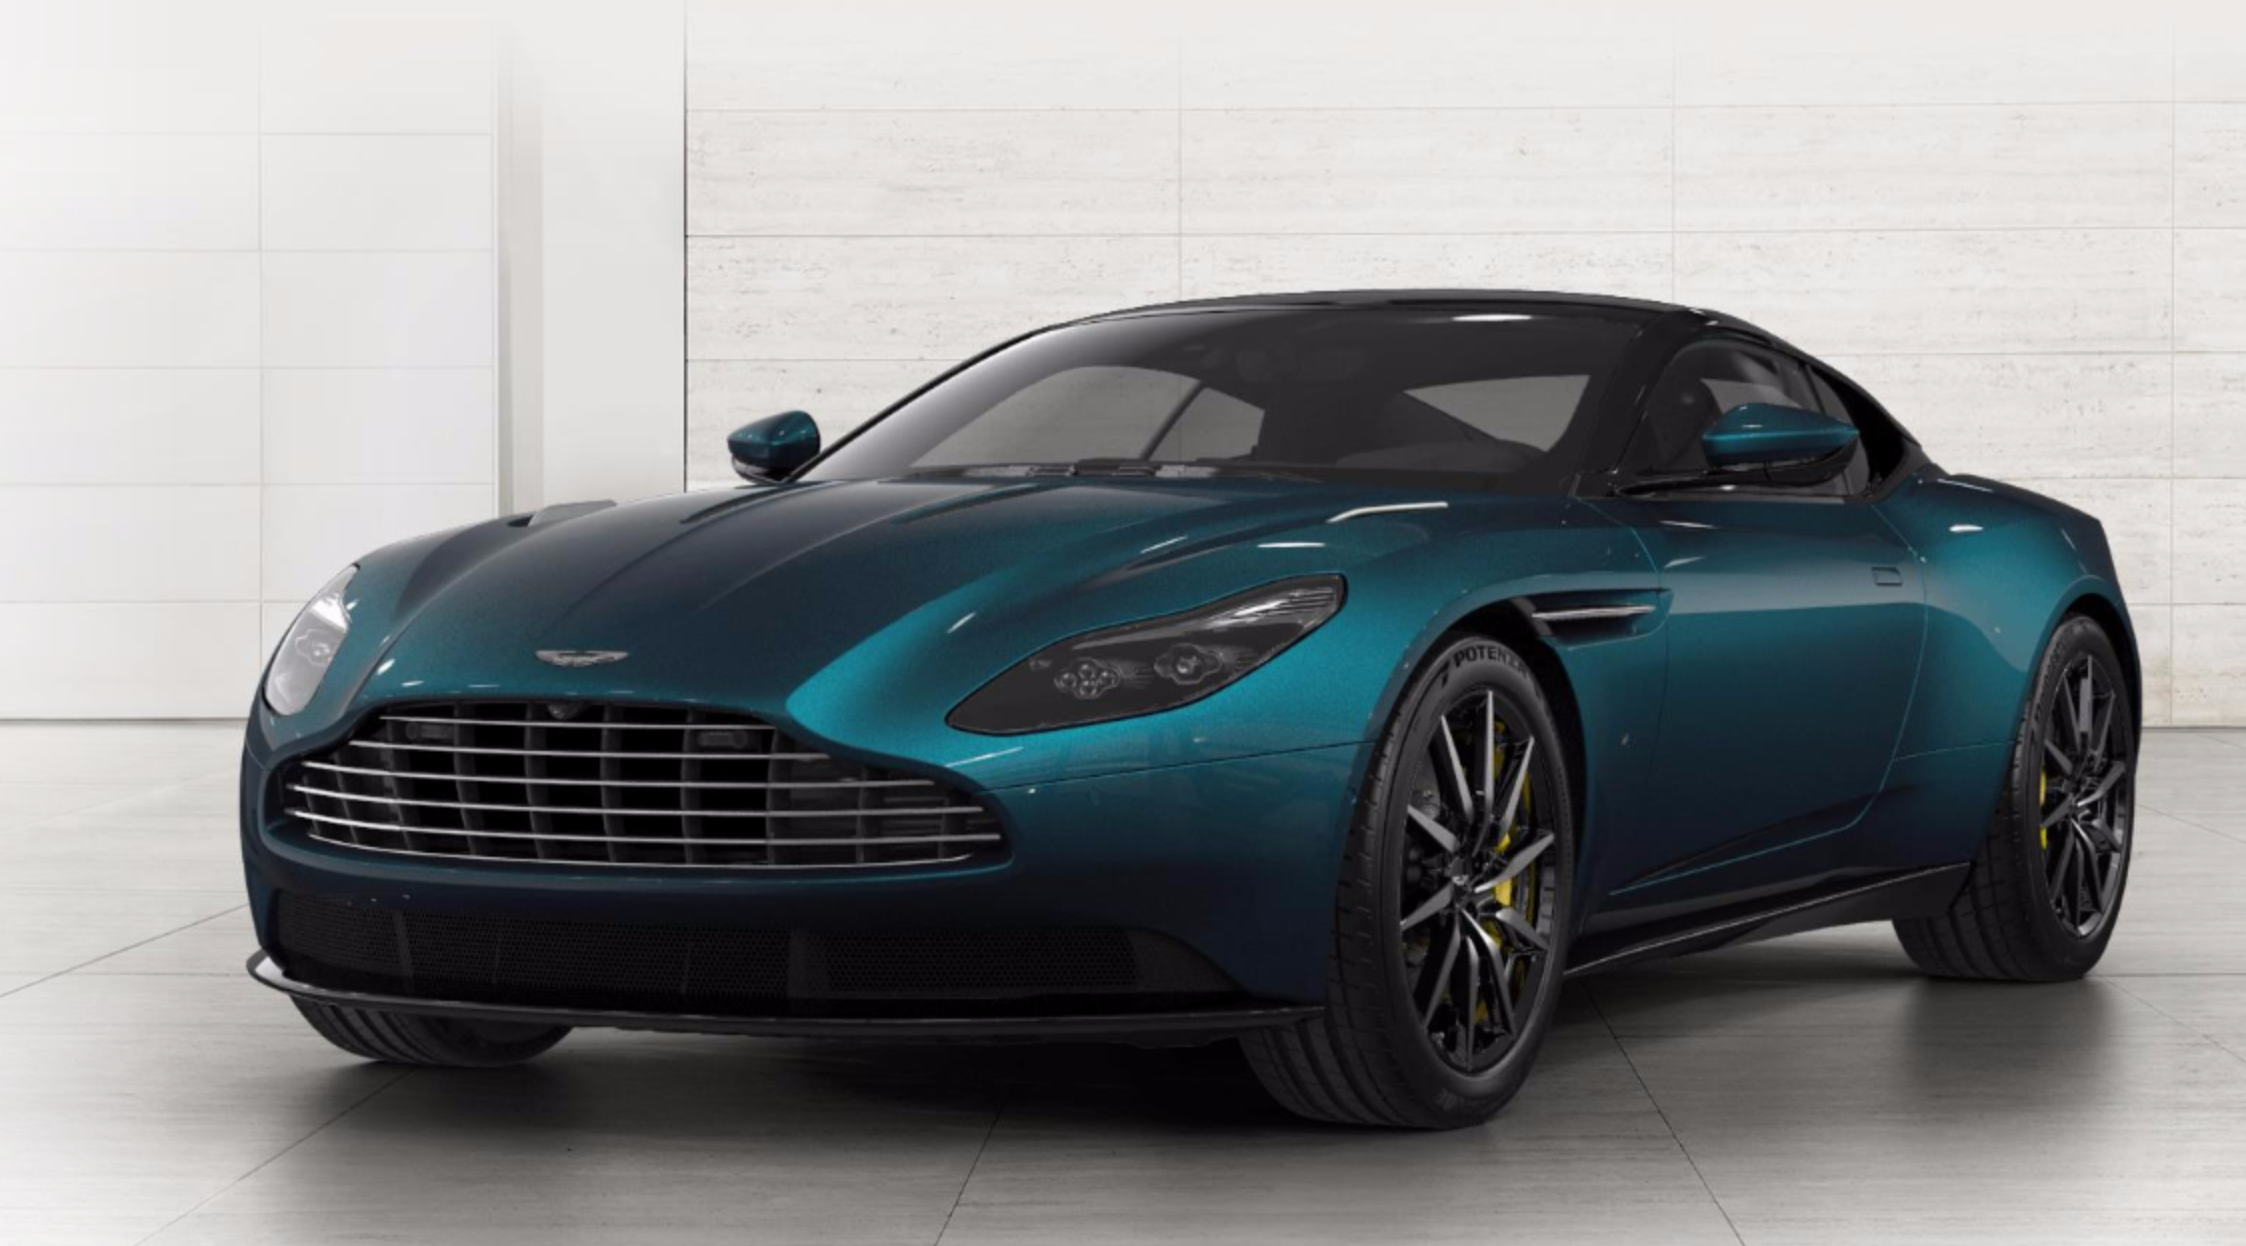 Aston Martin DB11: Most Beautiful Auto?  Ask Andy FORUMS